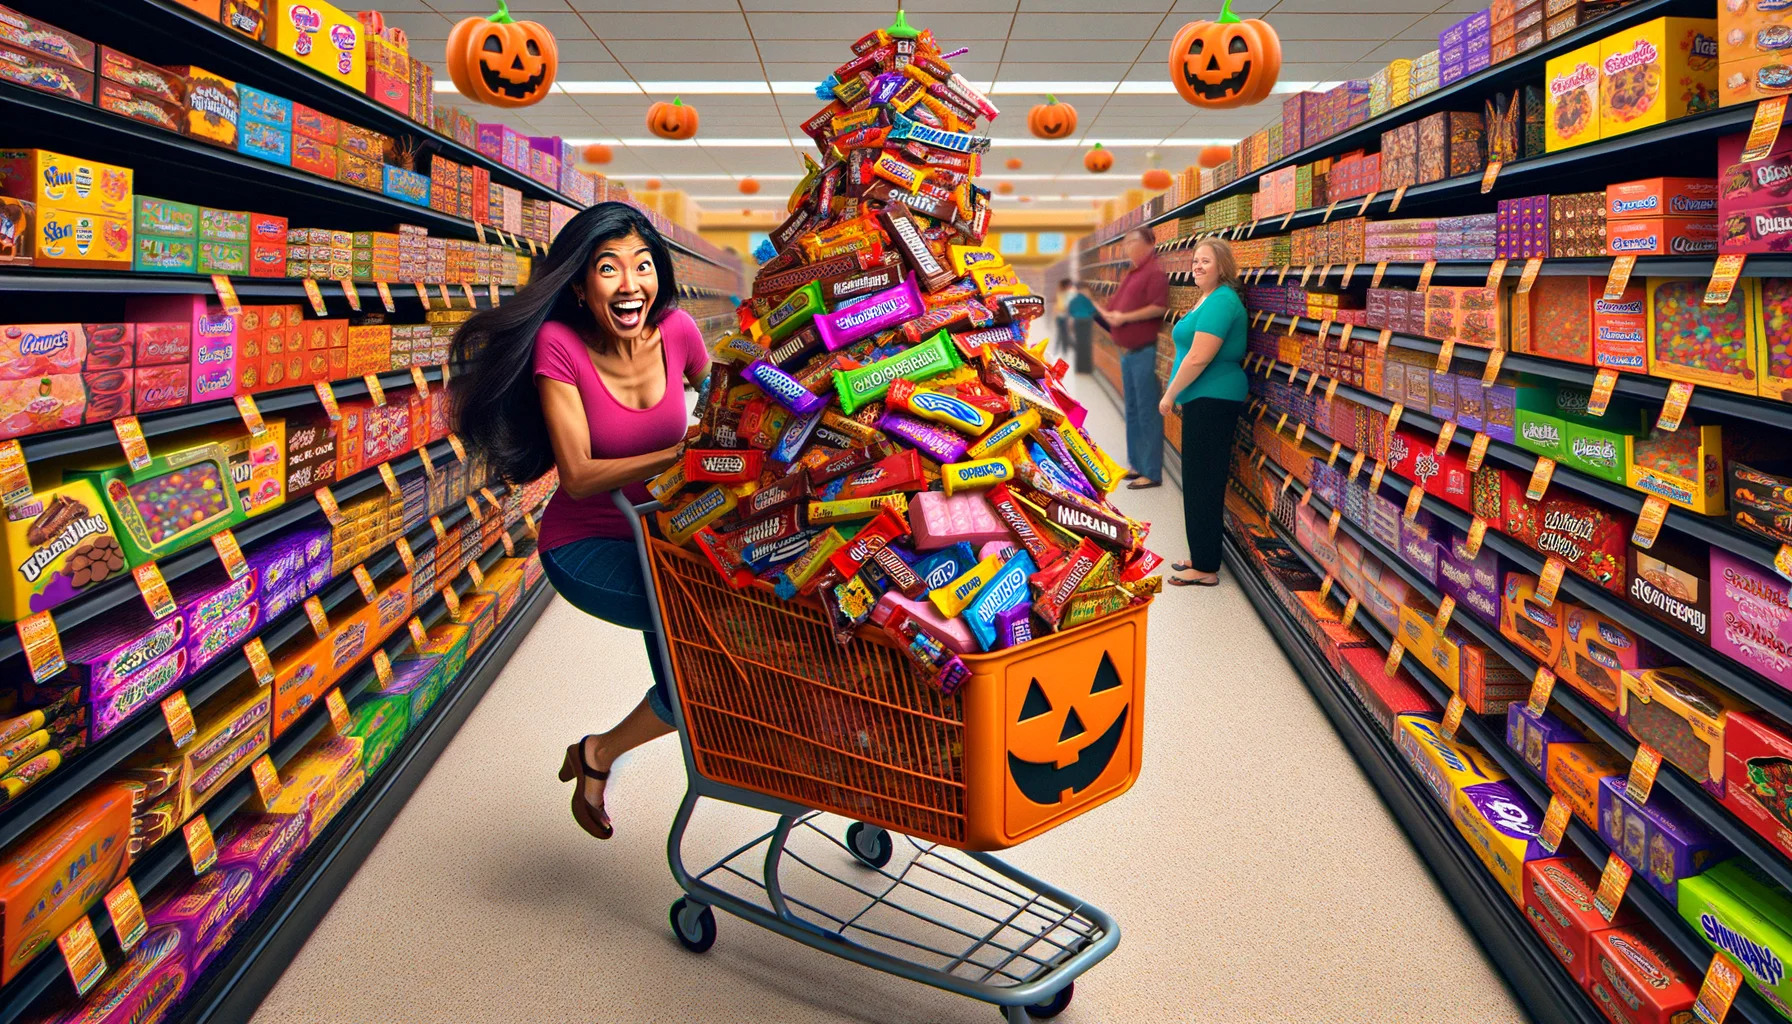 Create a whimsical and humorous image featuring a typical supermarket scene, with aisles filled to the brim with a variety of Halloween candies of all sorts - from chocolate bars to sour gummies. There is a conspicuous addition to this otherwise ordinary scene, a comically oversized shopping cart being pushed by a confident and enthusiastic South Asian woman, clearly thrilled by her bulk purchase preparation for Halloween. The shopping cart is almost toppling with the mountains of candy, causing shoppers around her to stare in amused disbelief. The scene exudes both absurdity and charm, capturing the joys and excesses of holiday consumerism.